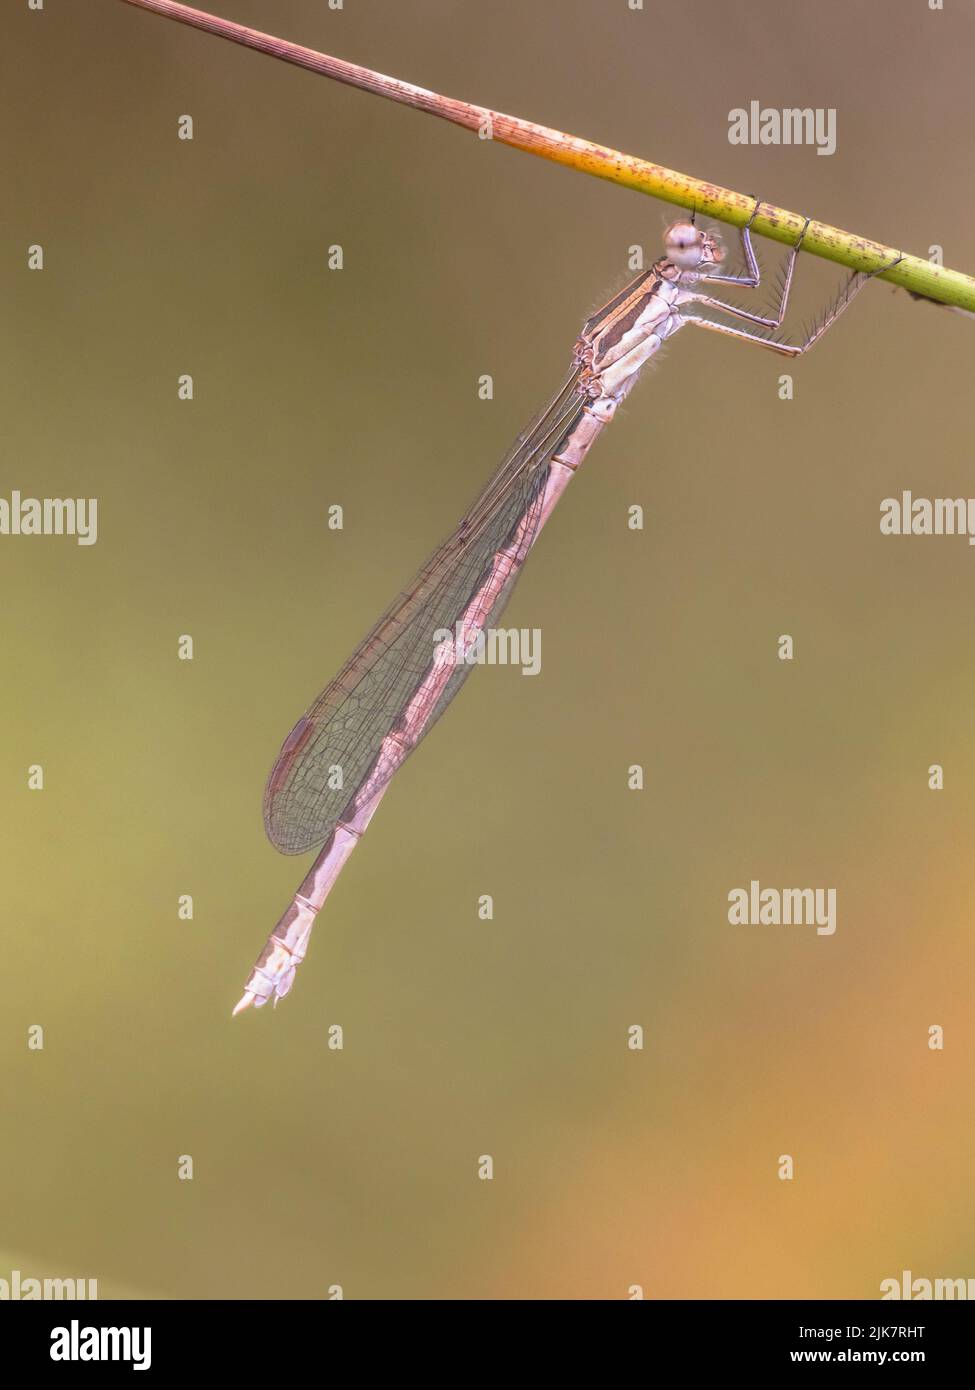 Common winter damselfly (Sympecma fusca) perched on twig against bright green background Stock Photo